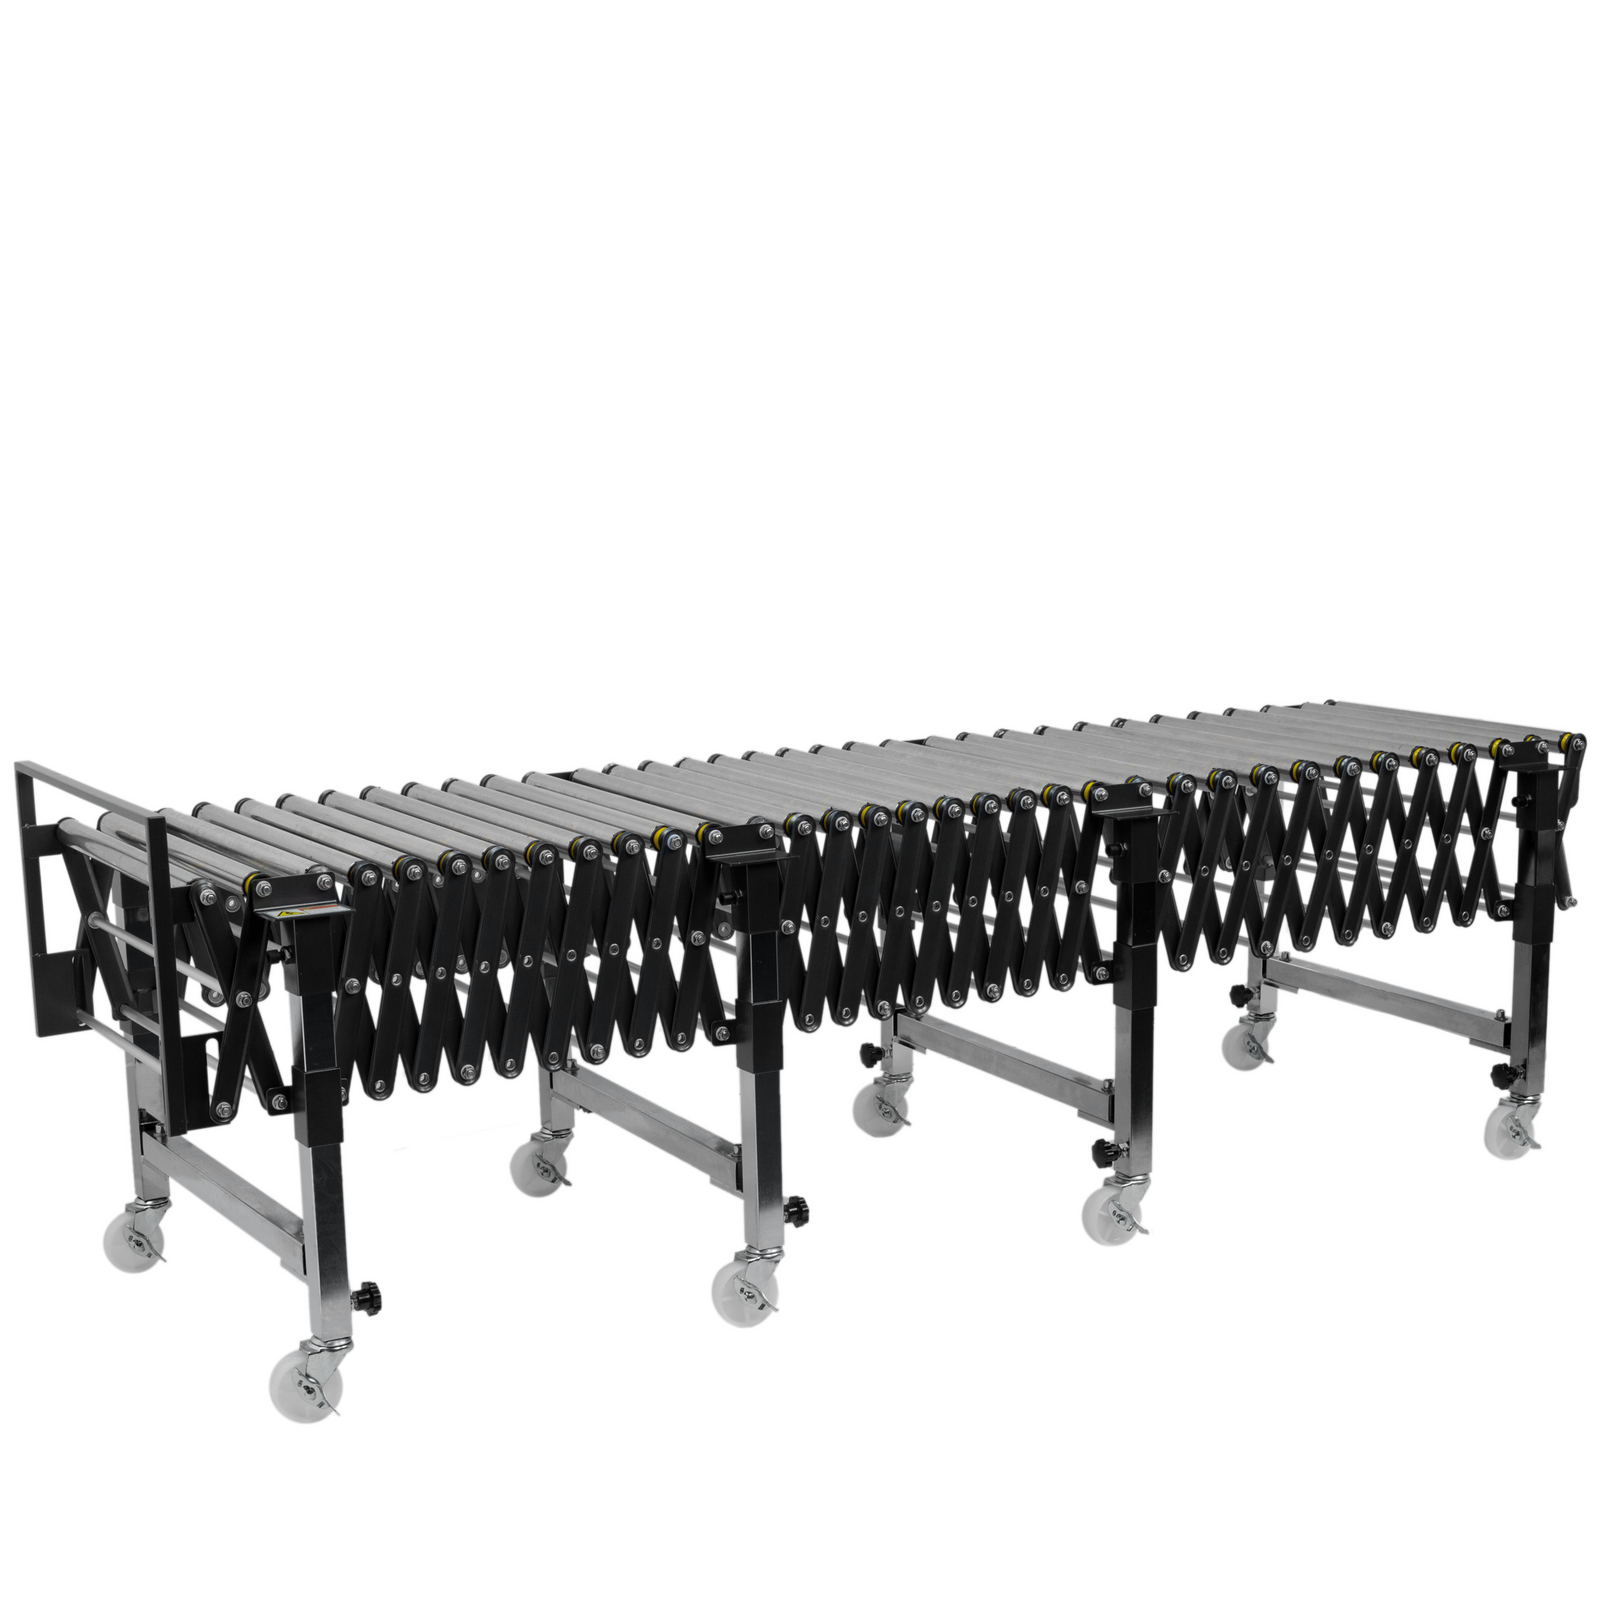 straight stainless steel gravity roller conveyor with rolling casters